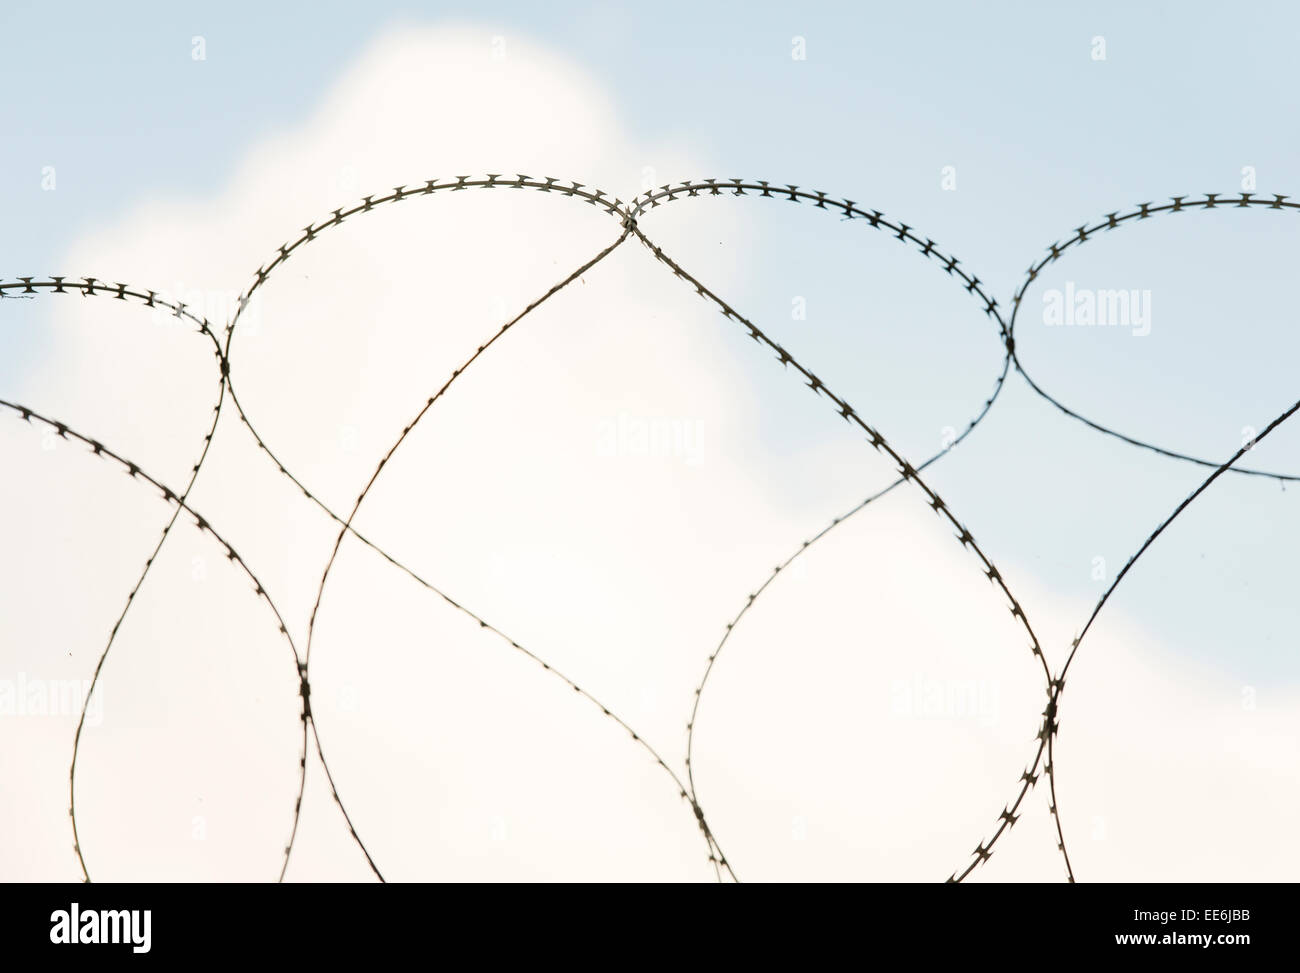 Barbed wire with heart shape and sky. Conceptual image of freedom, challenge and love. Stock Photo